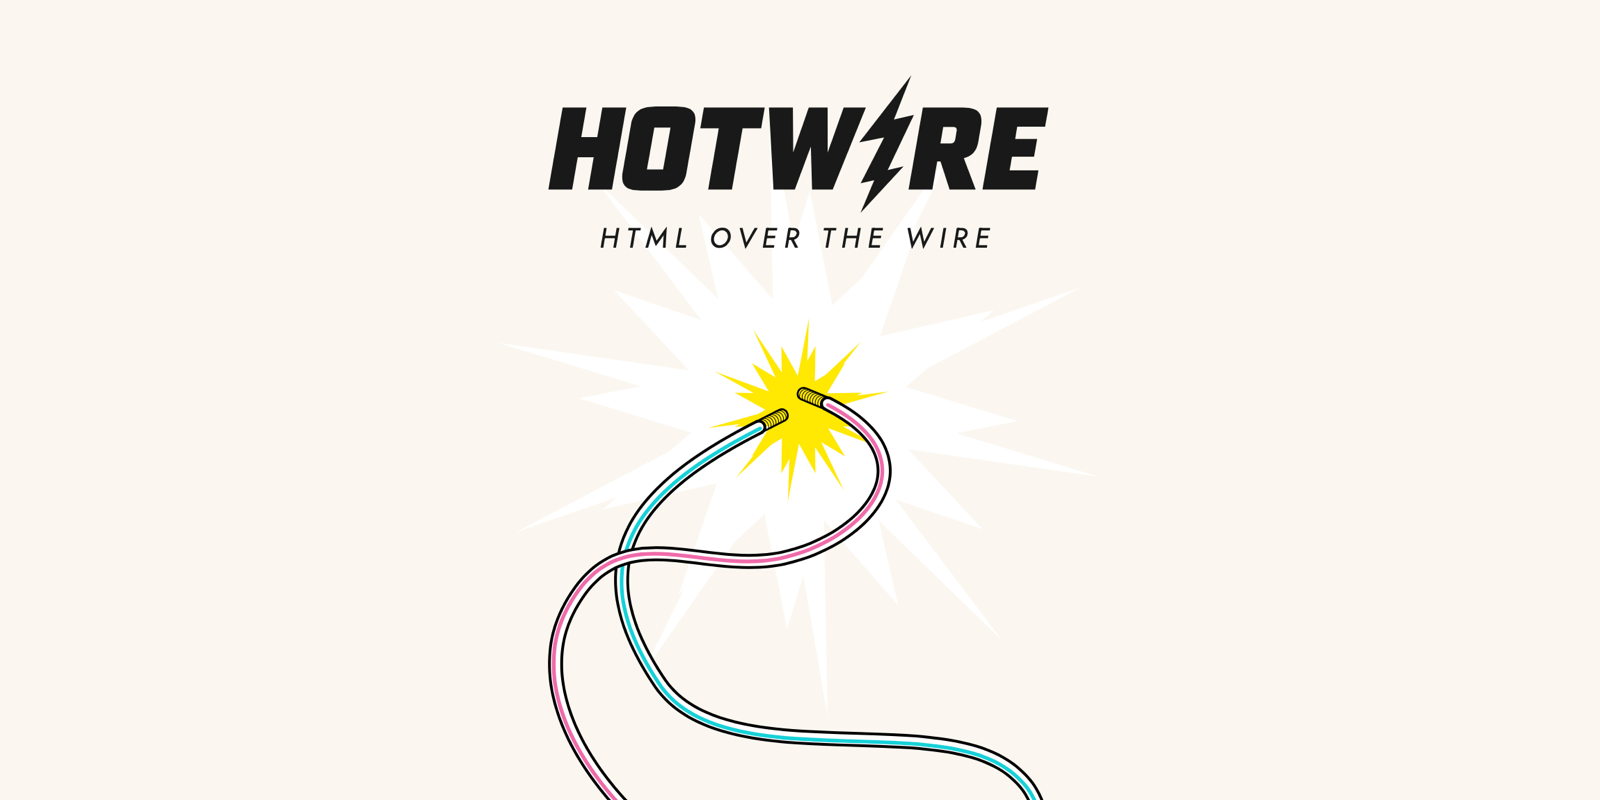 Hotwire - HTML over the wire